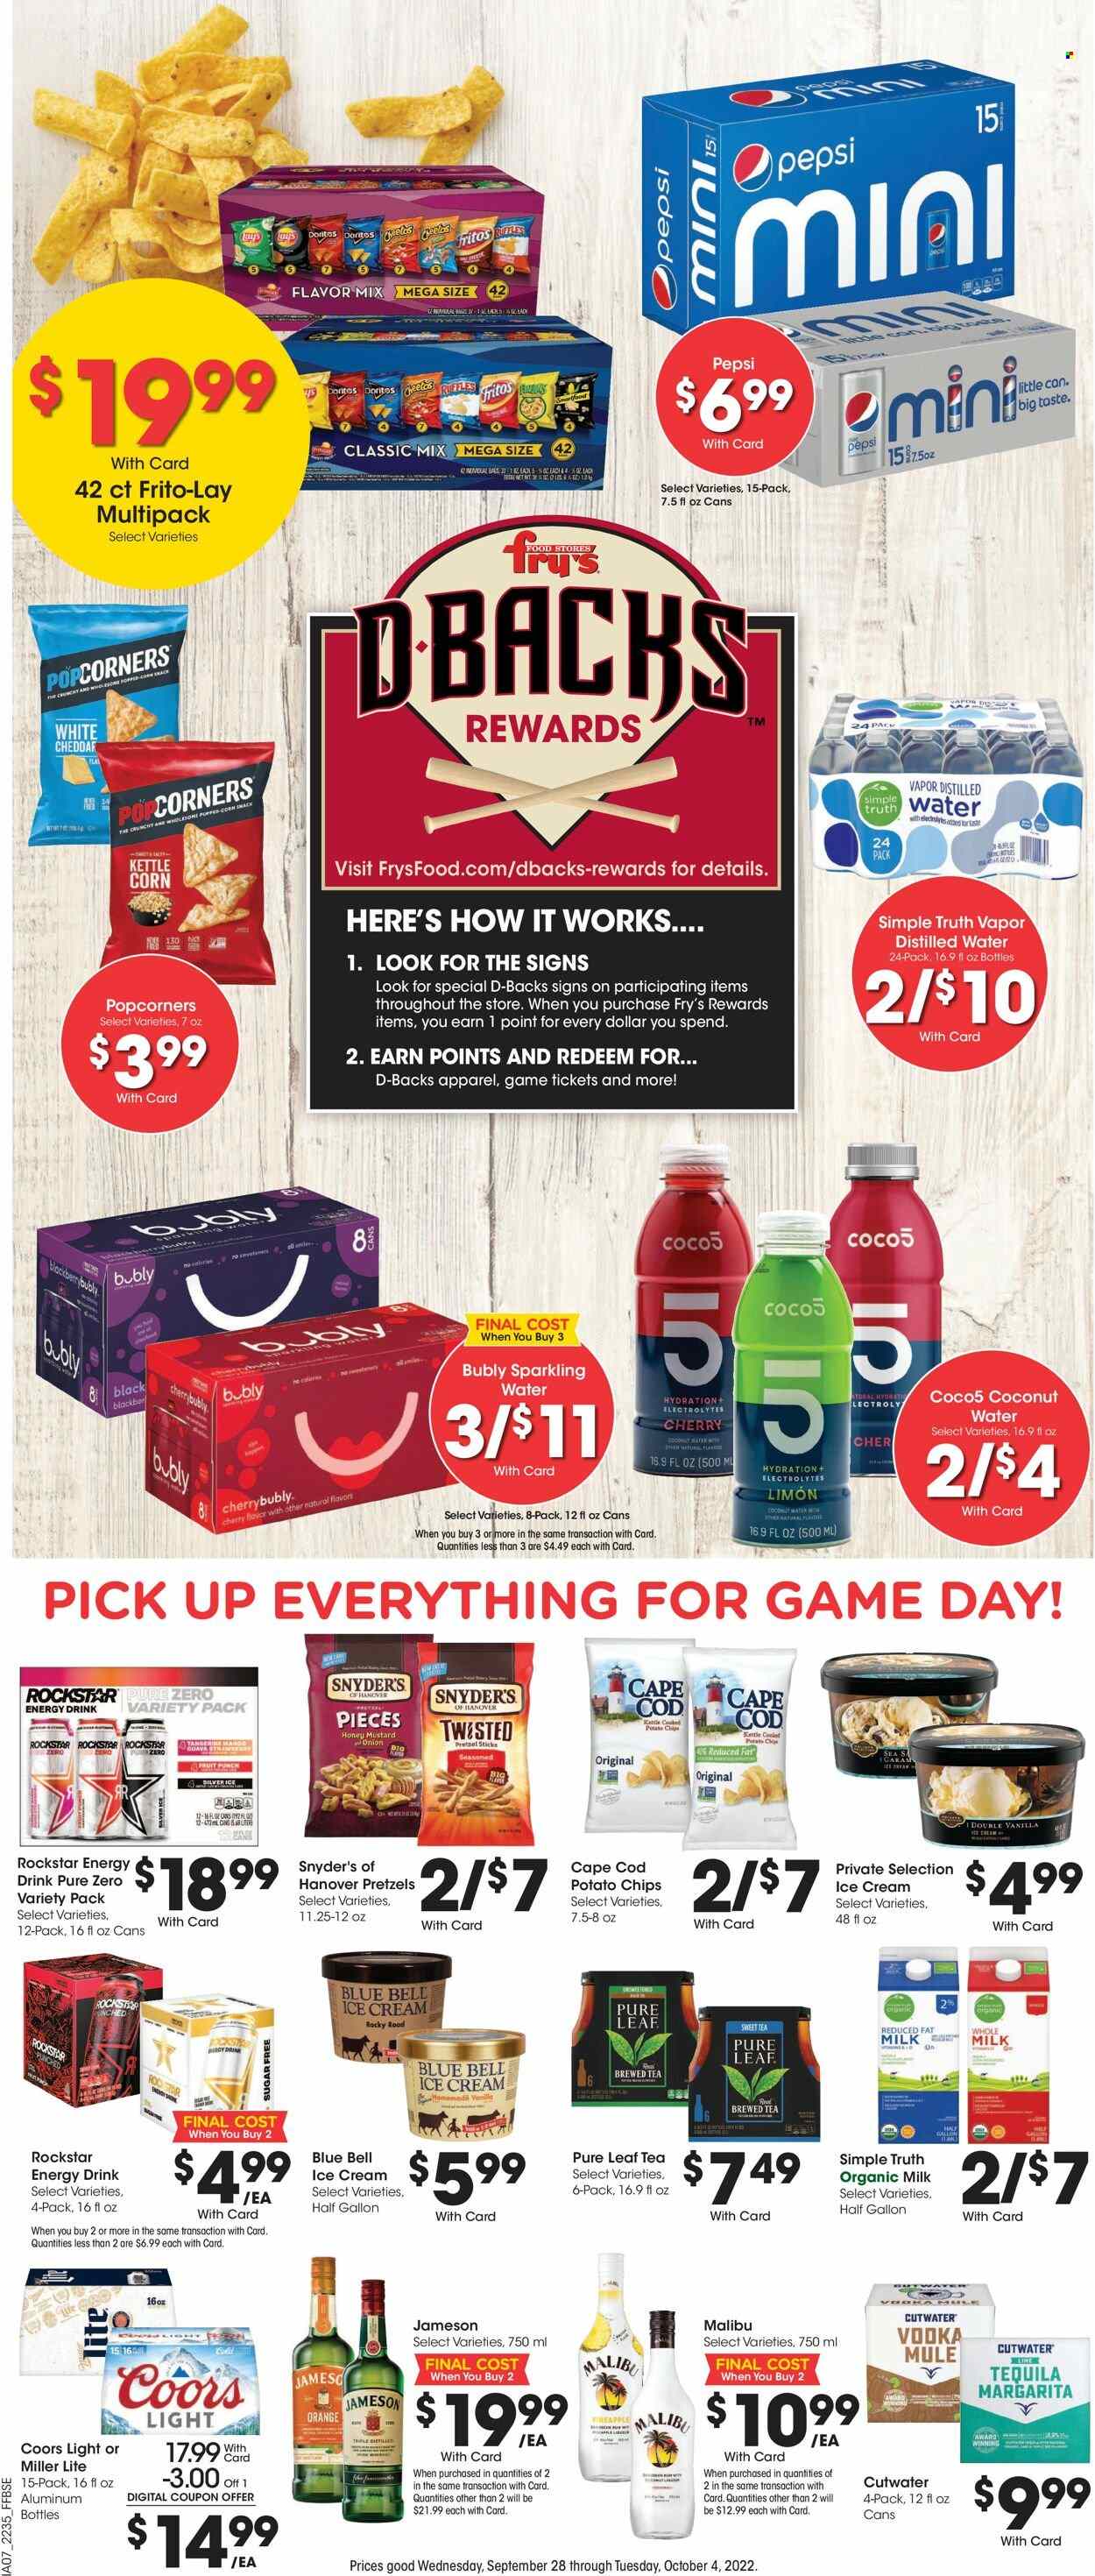 thumbnail - Fry’s Flyer - 09/28/2022 - 10/04/2022 - Sales products - pretzels, onion, guava, pineapple, cherries, oranges, cod, organic milk, ice cream, Blue Bell, snack, Doritos, Fritos, kettle corn, potato chips, Cheetos, chips, Lay’s, popcorn, Frito-Lay, mustard, honey mustard, Pepsi, energy drink, coconut water, Rockstar, sparkling water, tea, Pure Leaf, tequila, vodka, Jameson, punch, Malibu, beer, Miller Lite, Coors. Page 11.